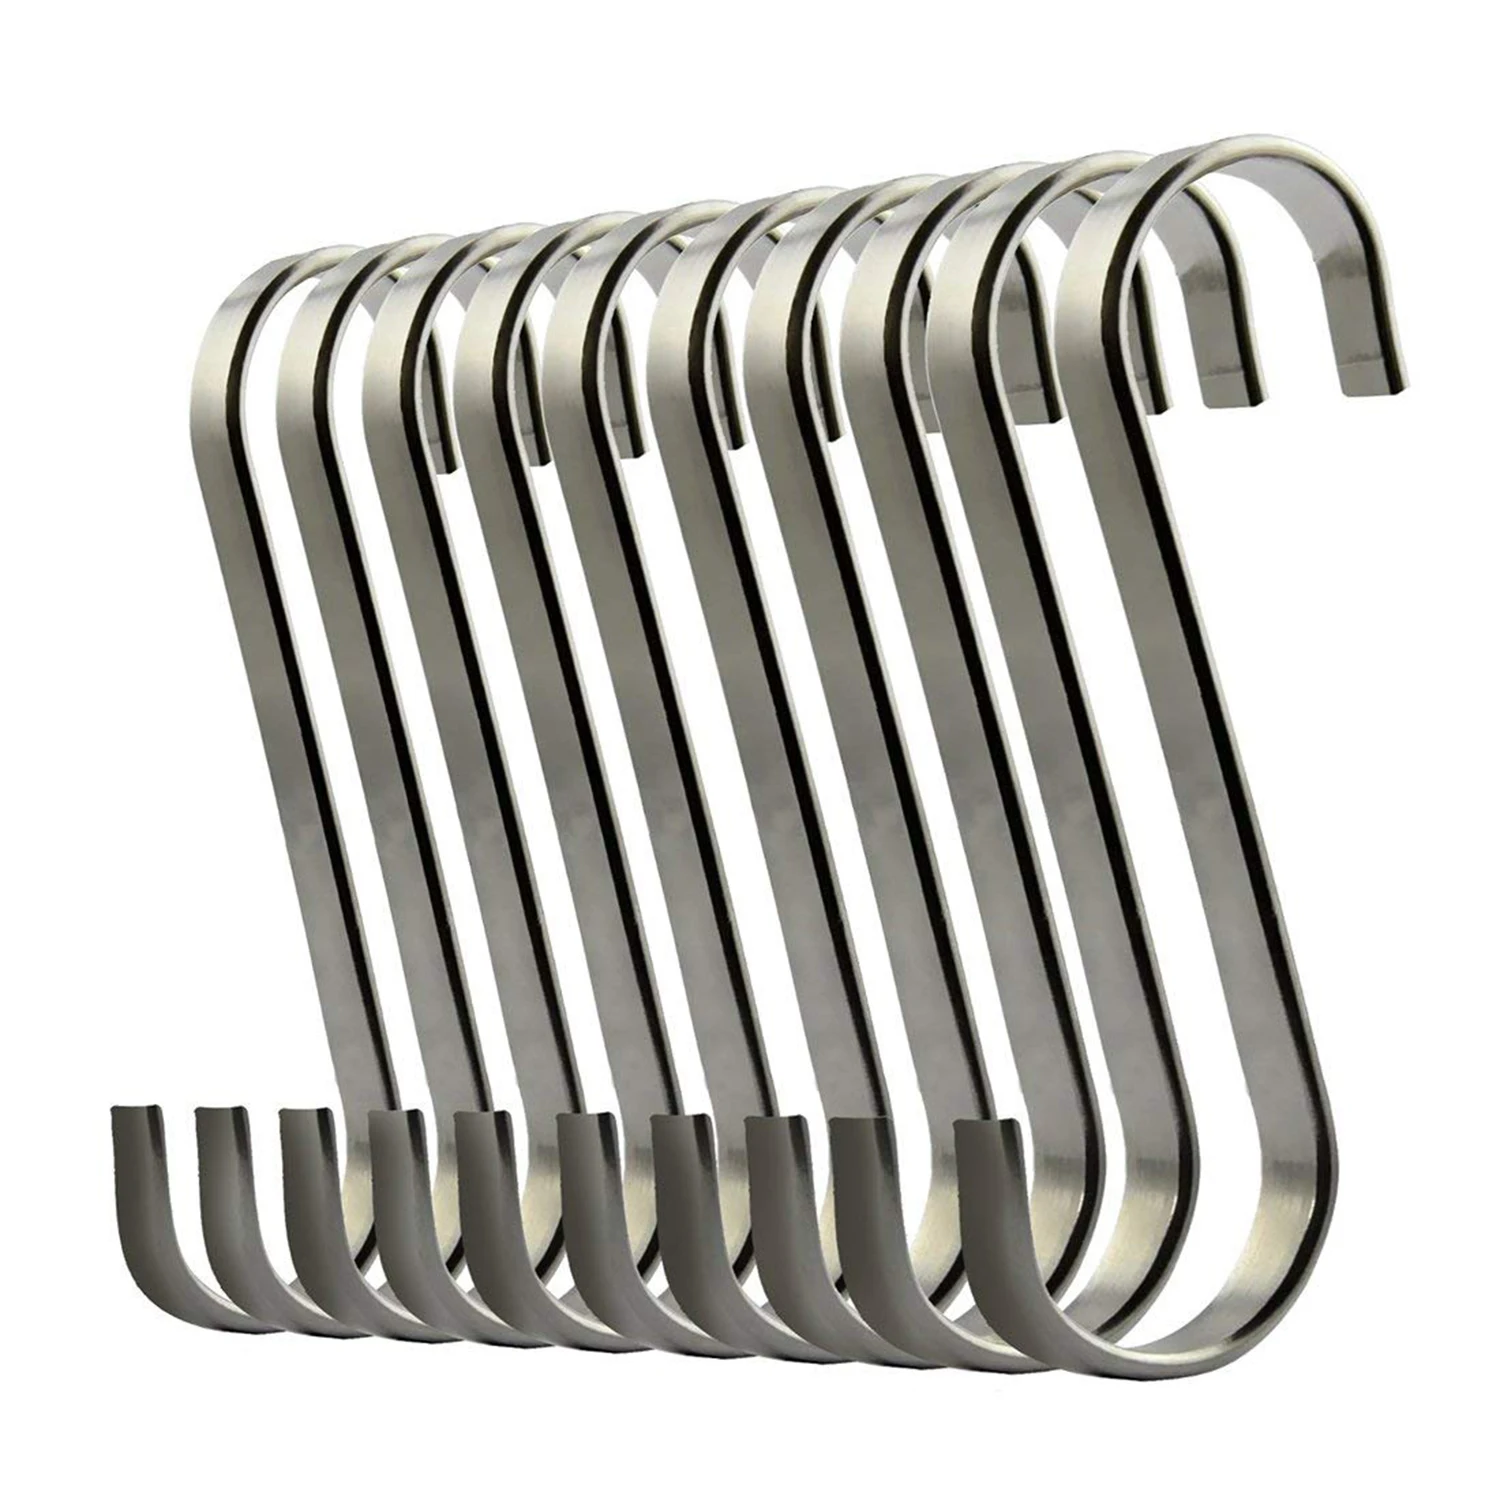 

Set of 10 S Stainless Steel Suspension Hooks for Kitchen Cookware or Butcher Meat